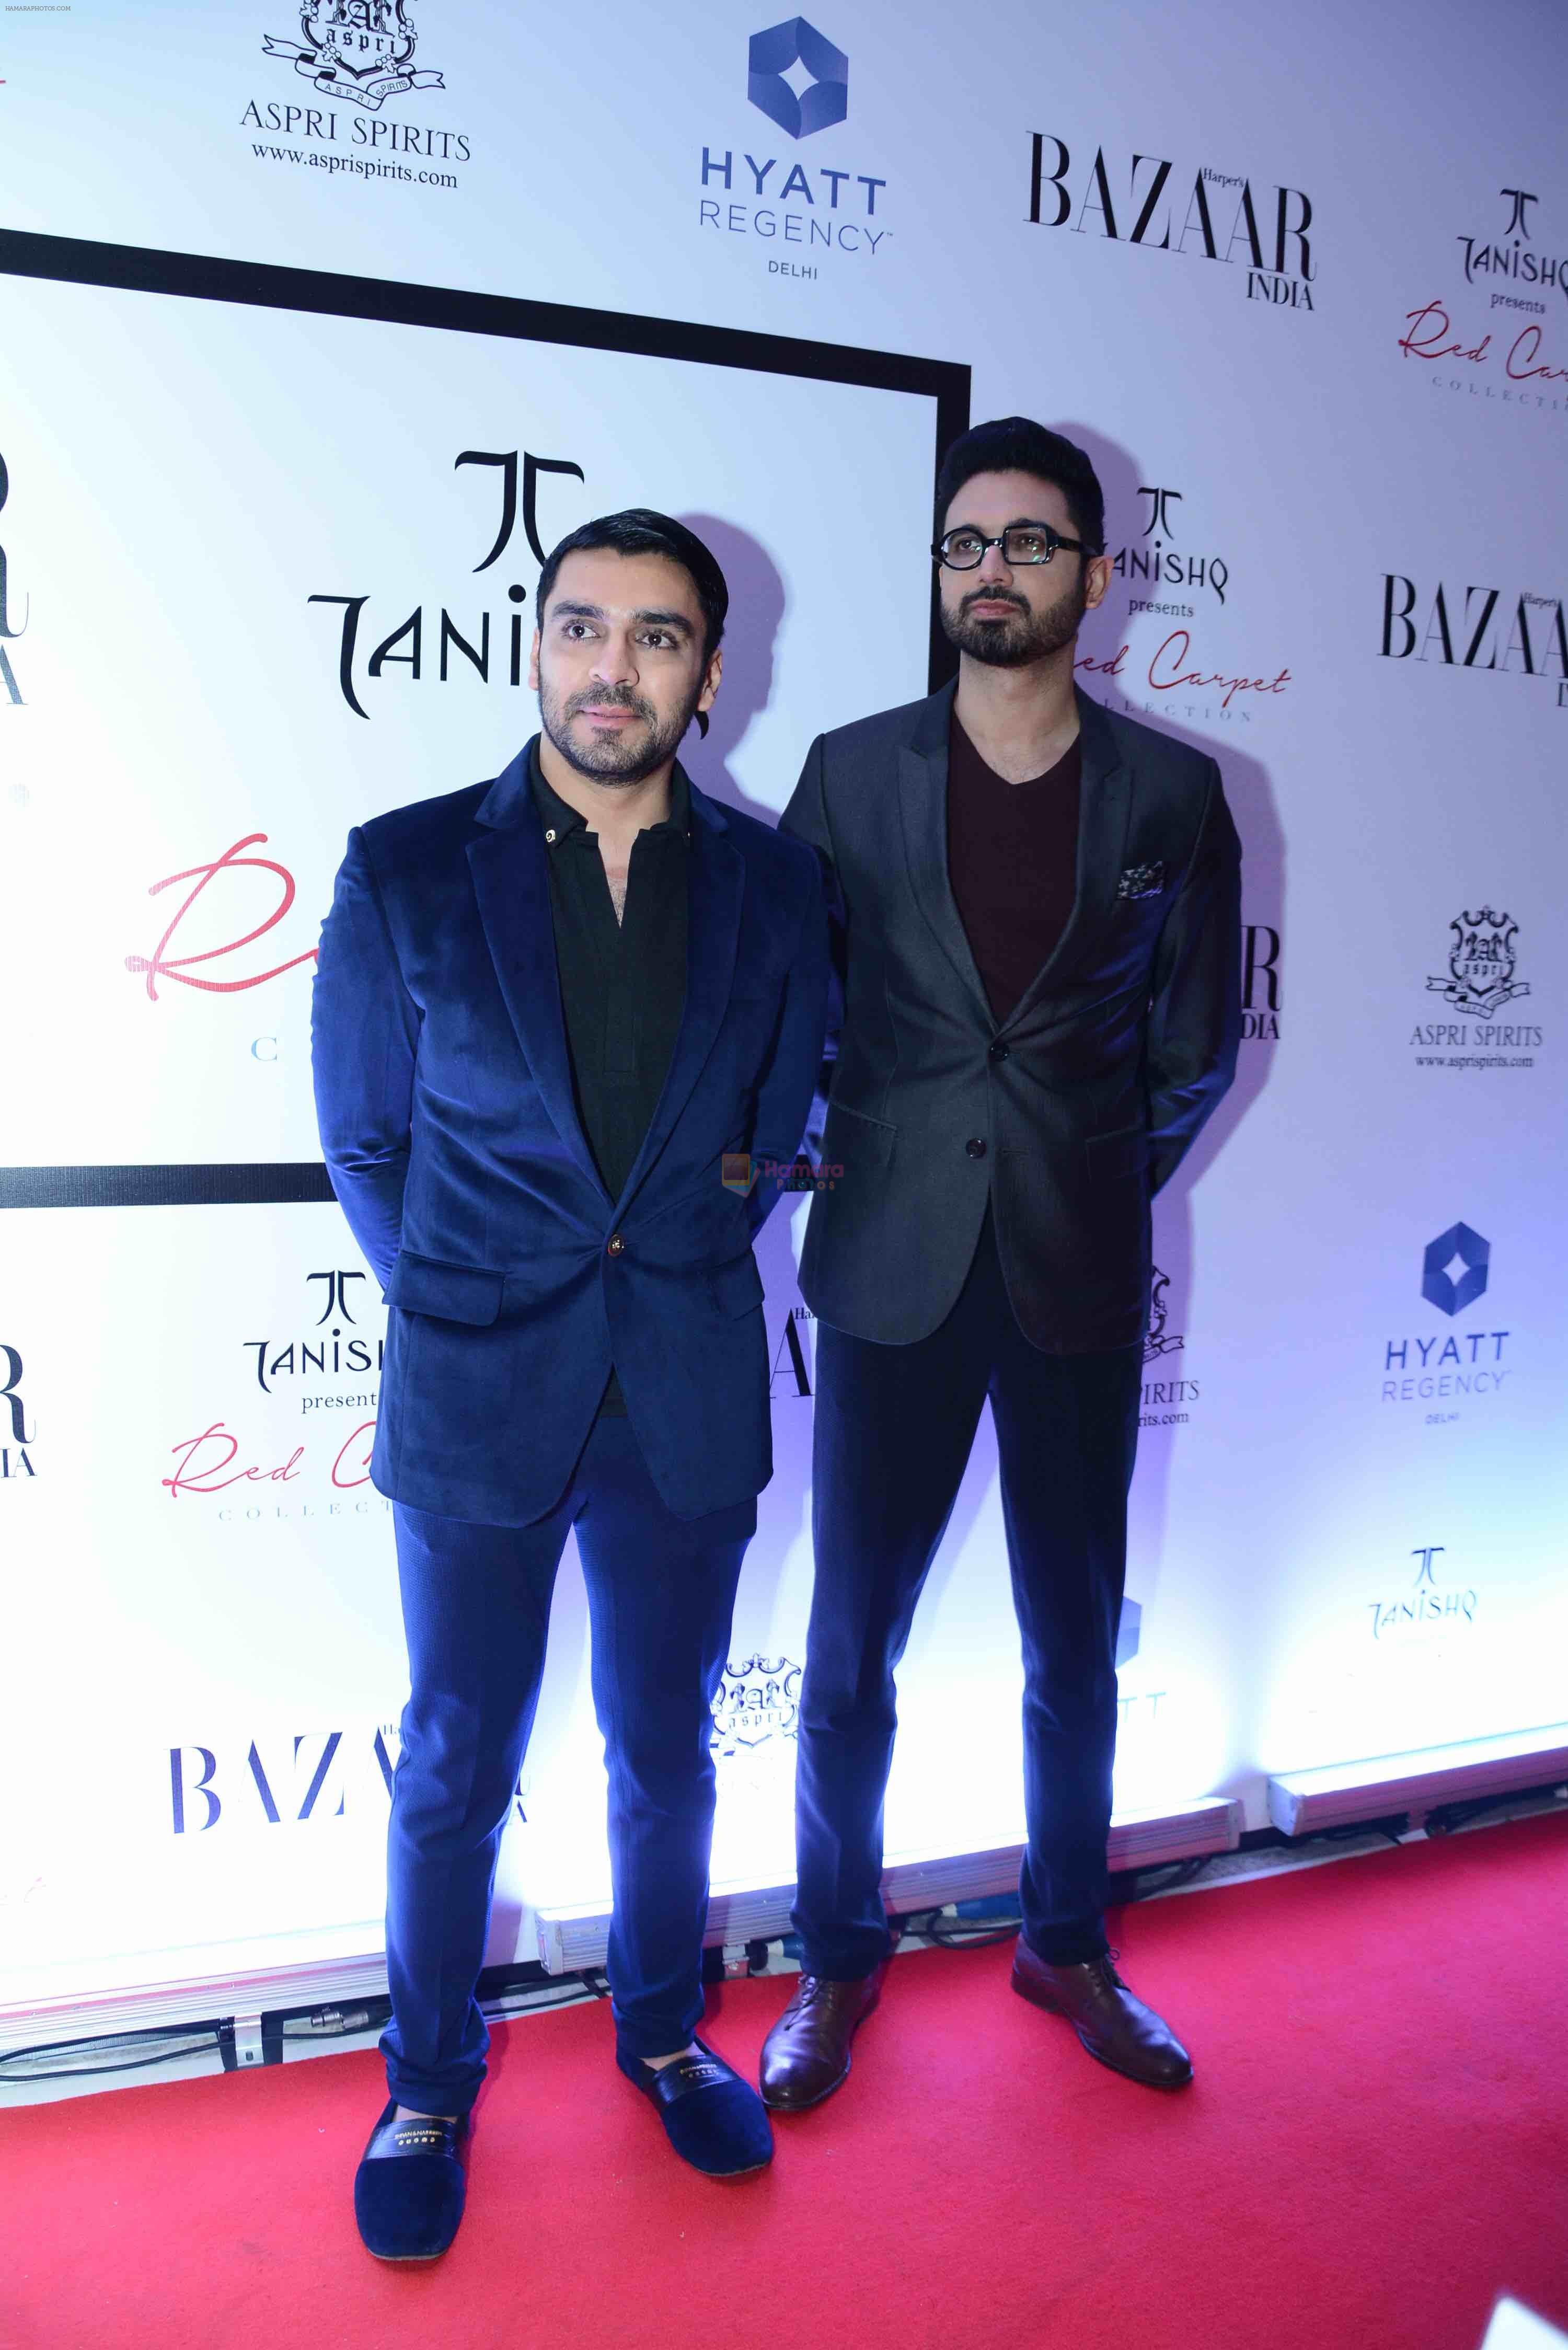 Shivan Bhatiya and Narresh Kukreja at the launch of The Iconic Book in Delhi on 10th May 2017